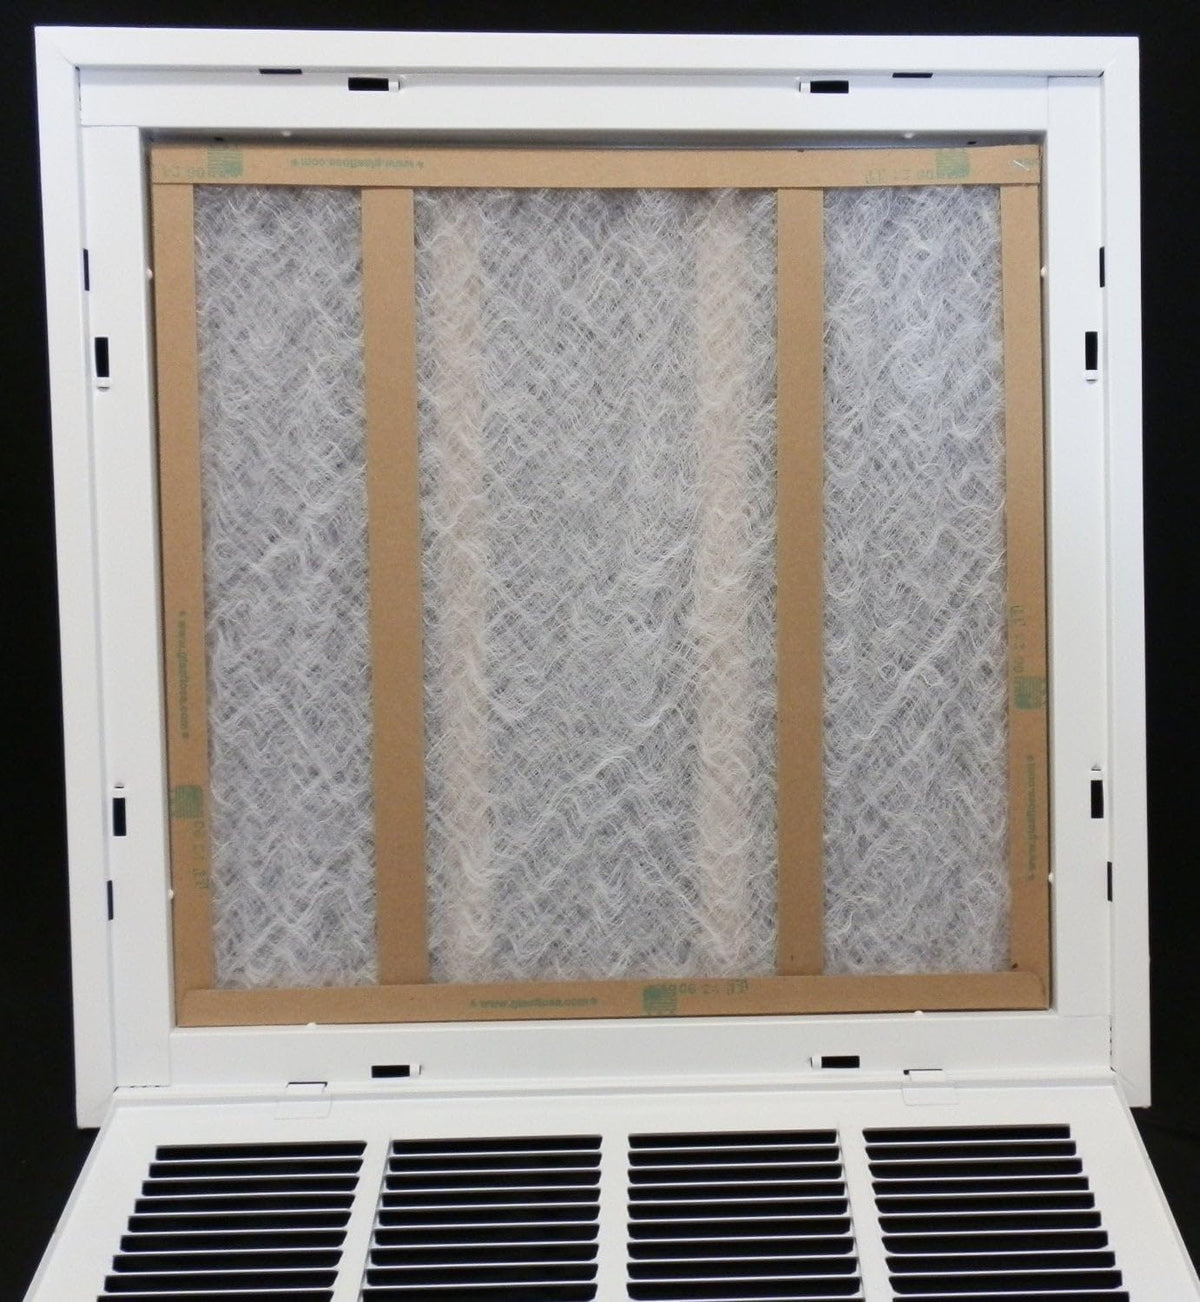 18&quot; X 24&quot; Steel Return Air Filter Grille for 1&quot; Filter - Removable Frame - * Filter Included * [Outer Dimensions: 20 5/8&quot; X 26 5/8&quot;]